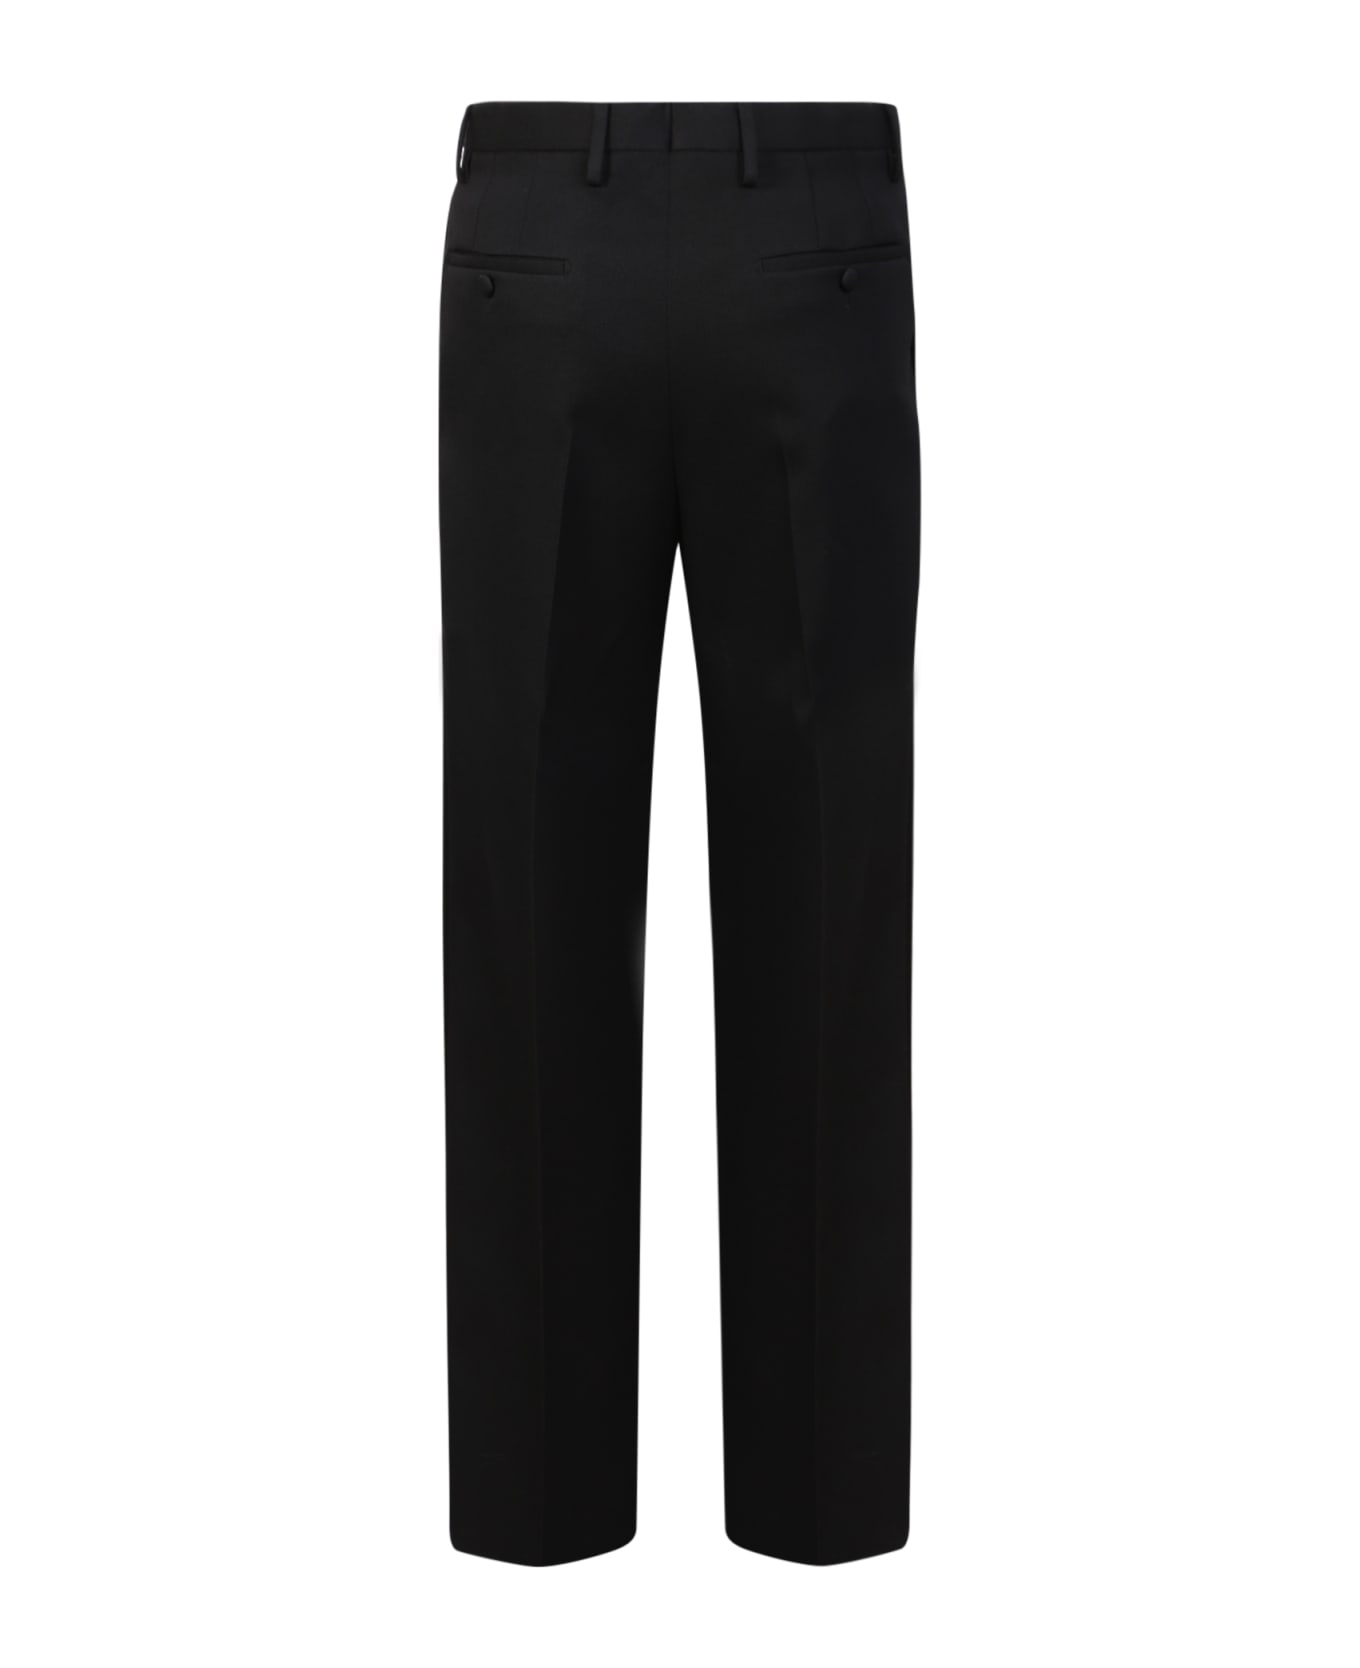 Lanvin Tailored Trousers - Black ボトムス